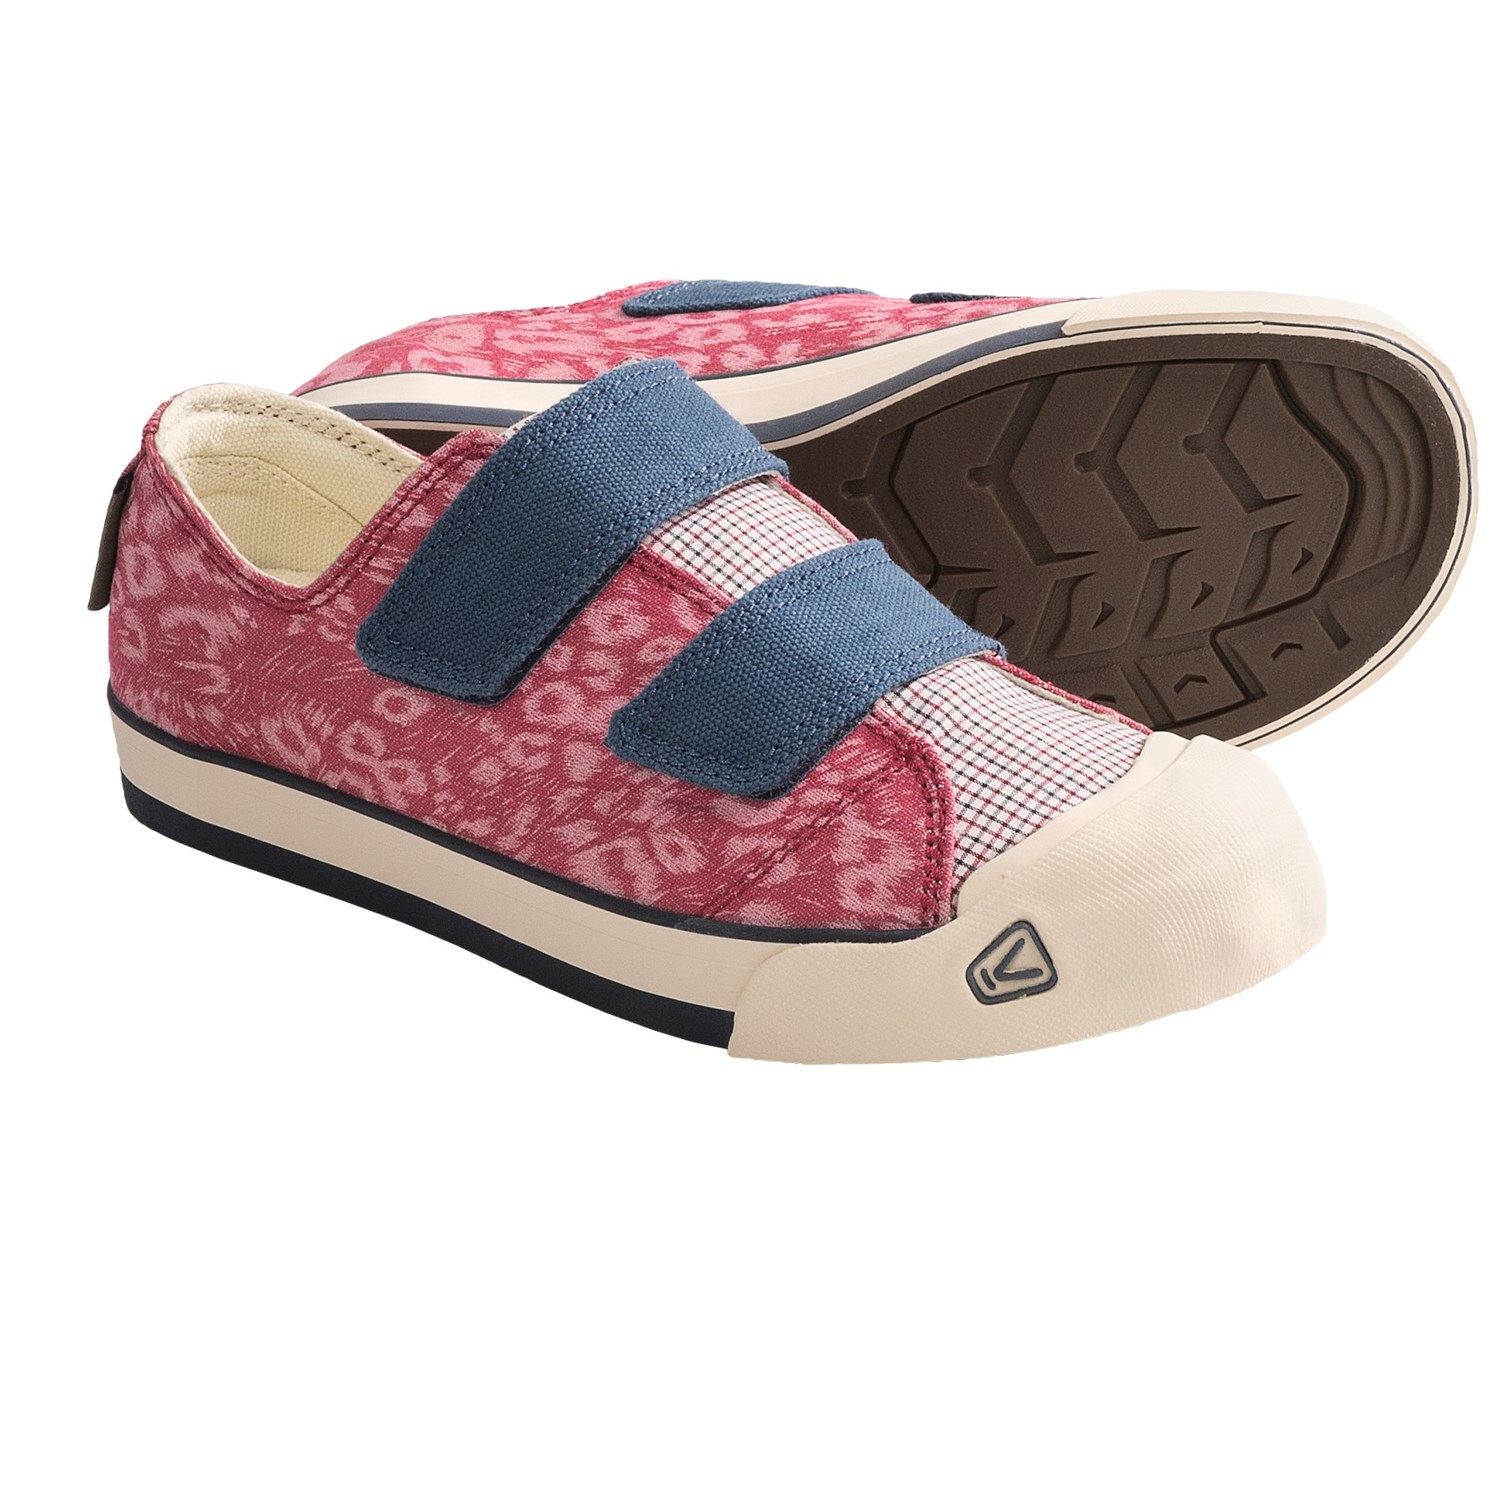 Keen Sula Shoes - Slip-Ons (For Women) in Ensign Blue